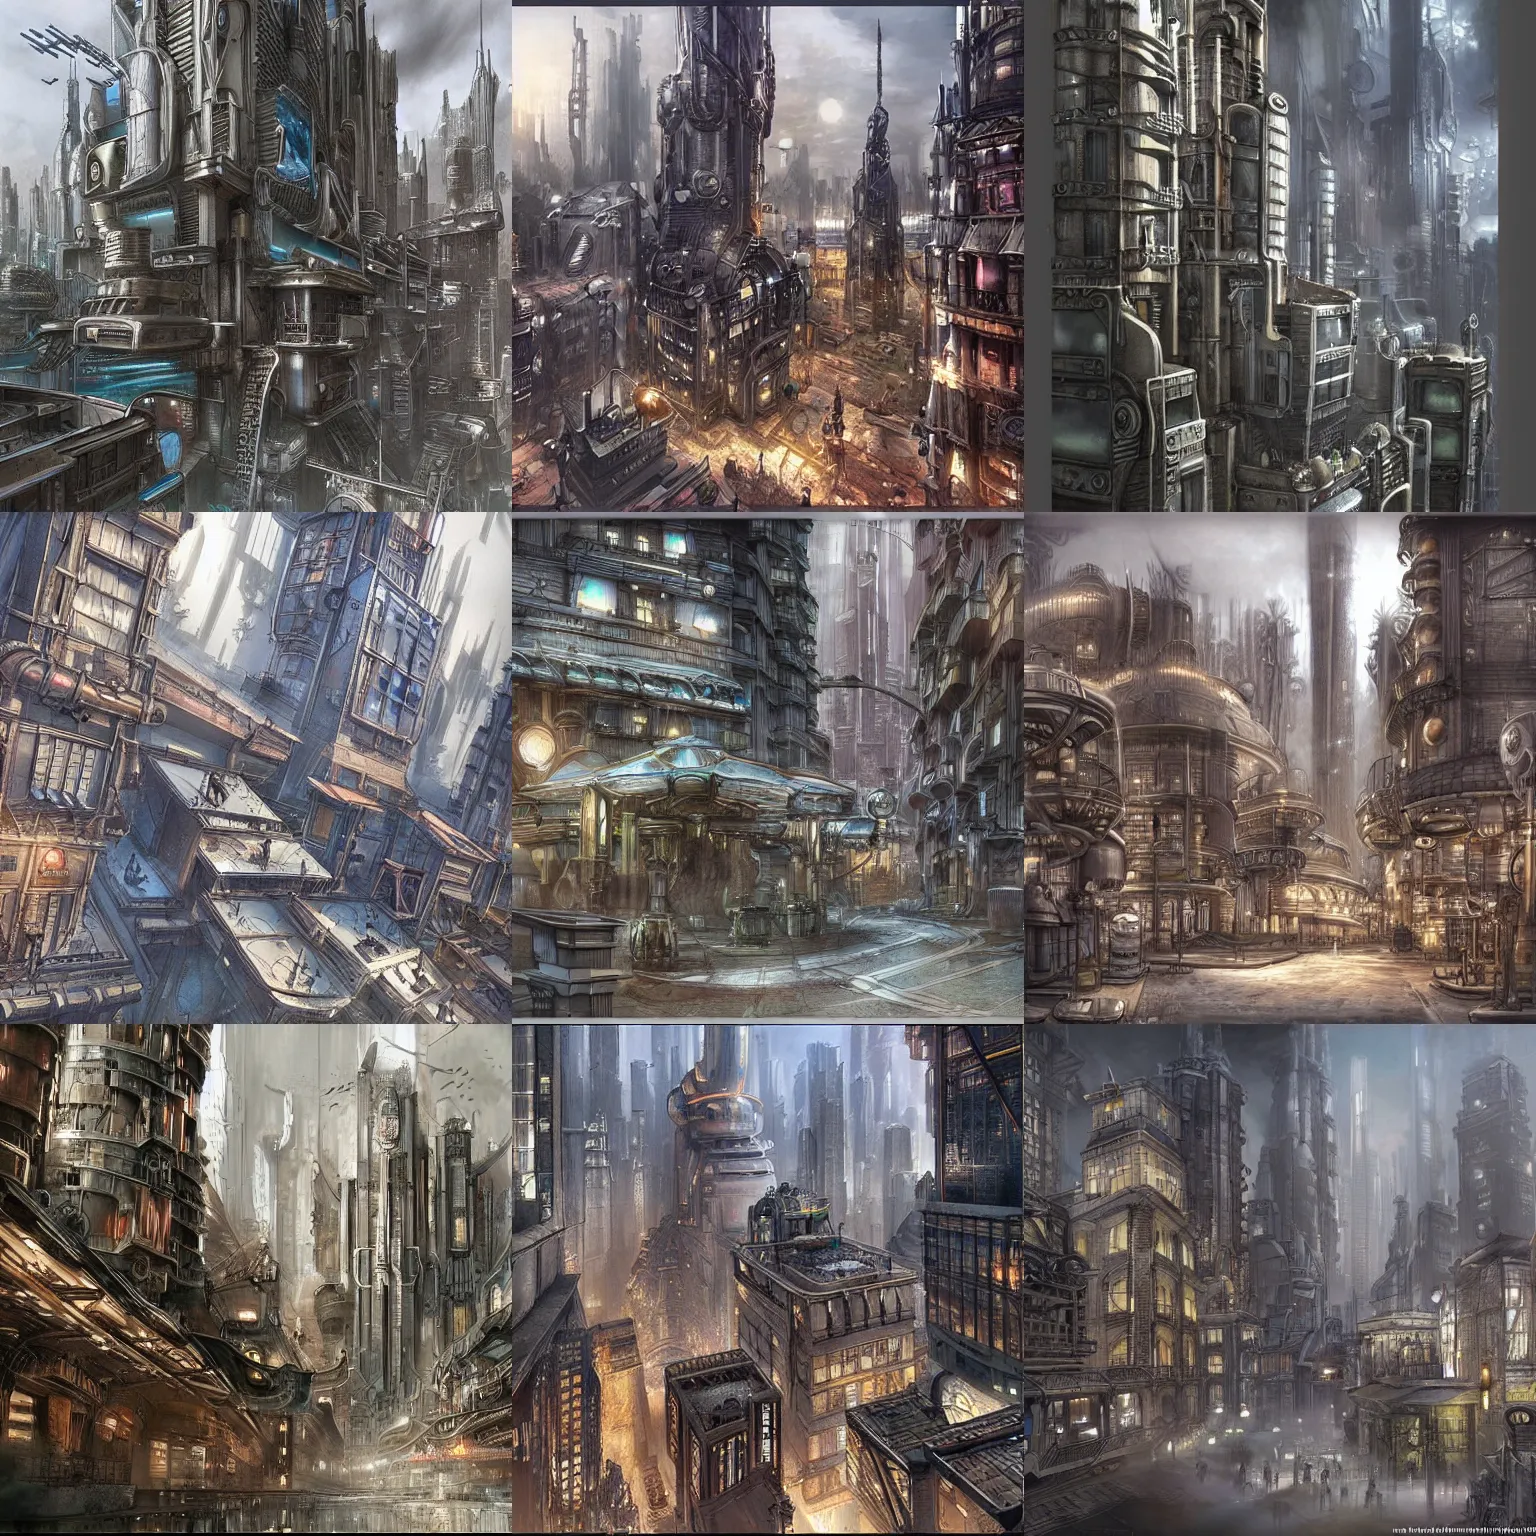 sci fi architecture drawings